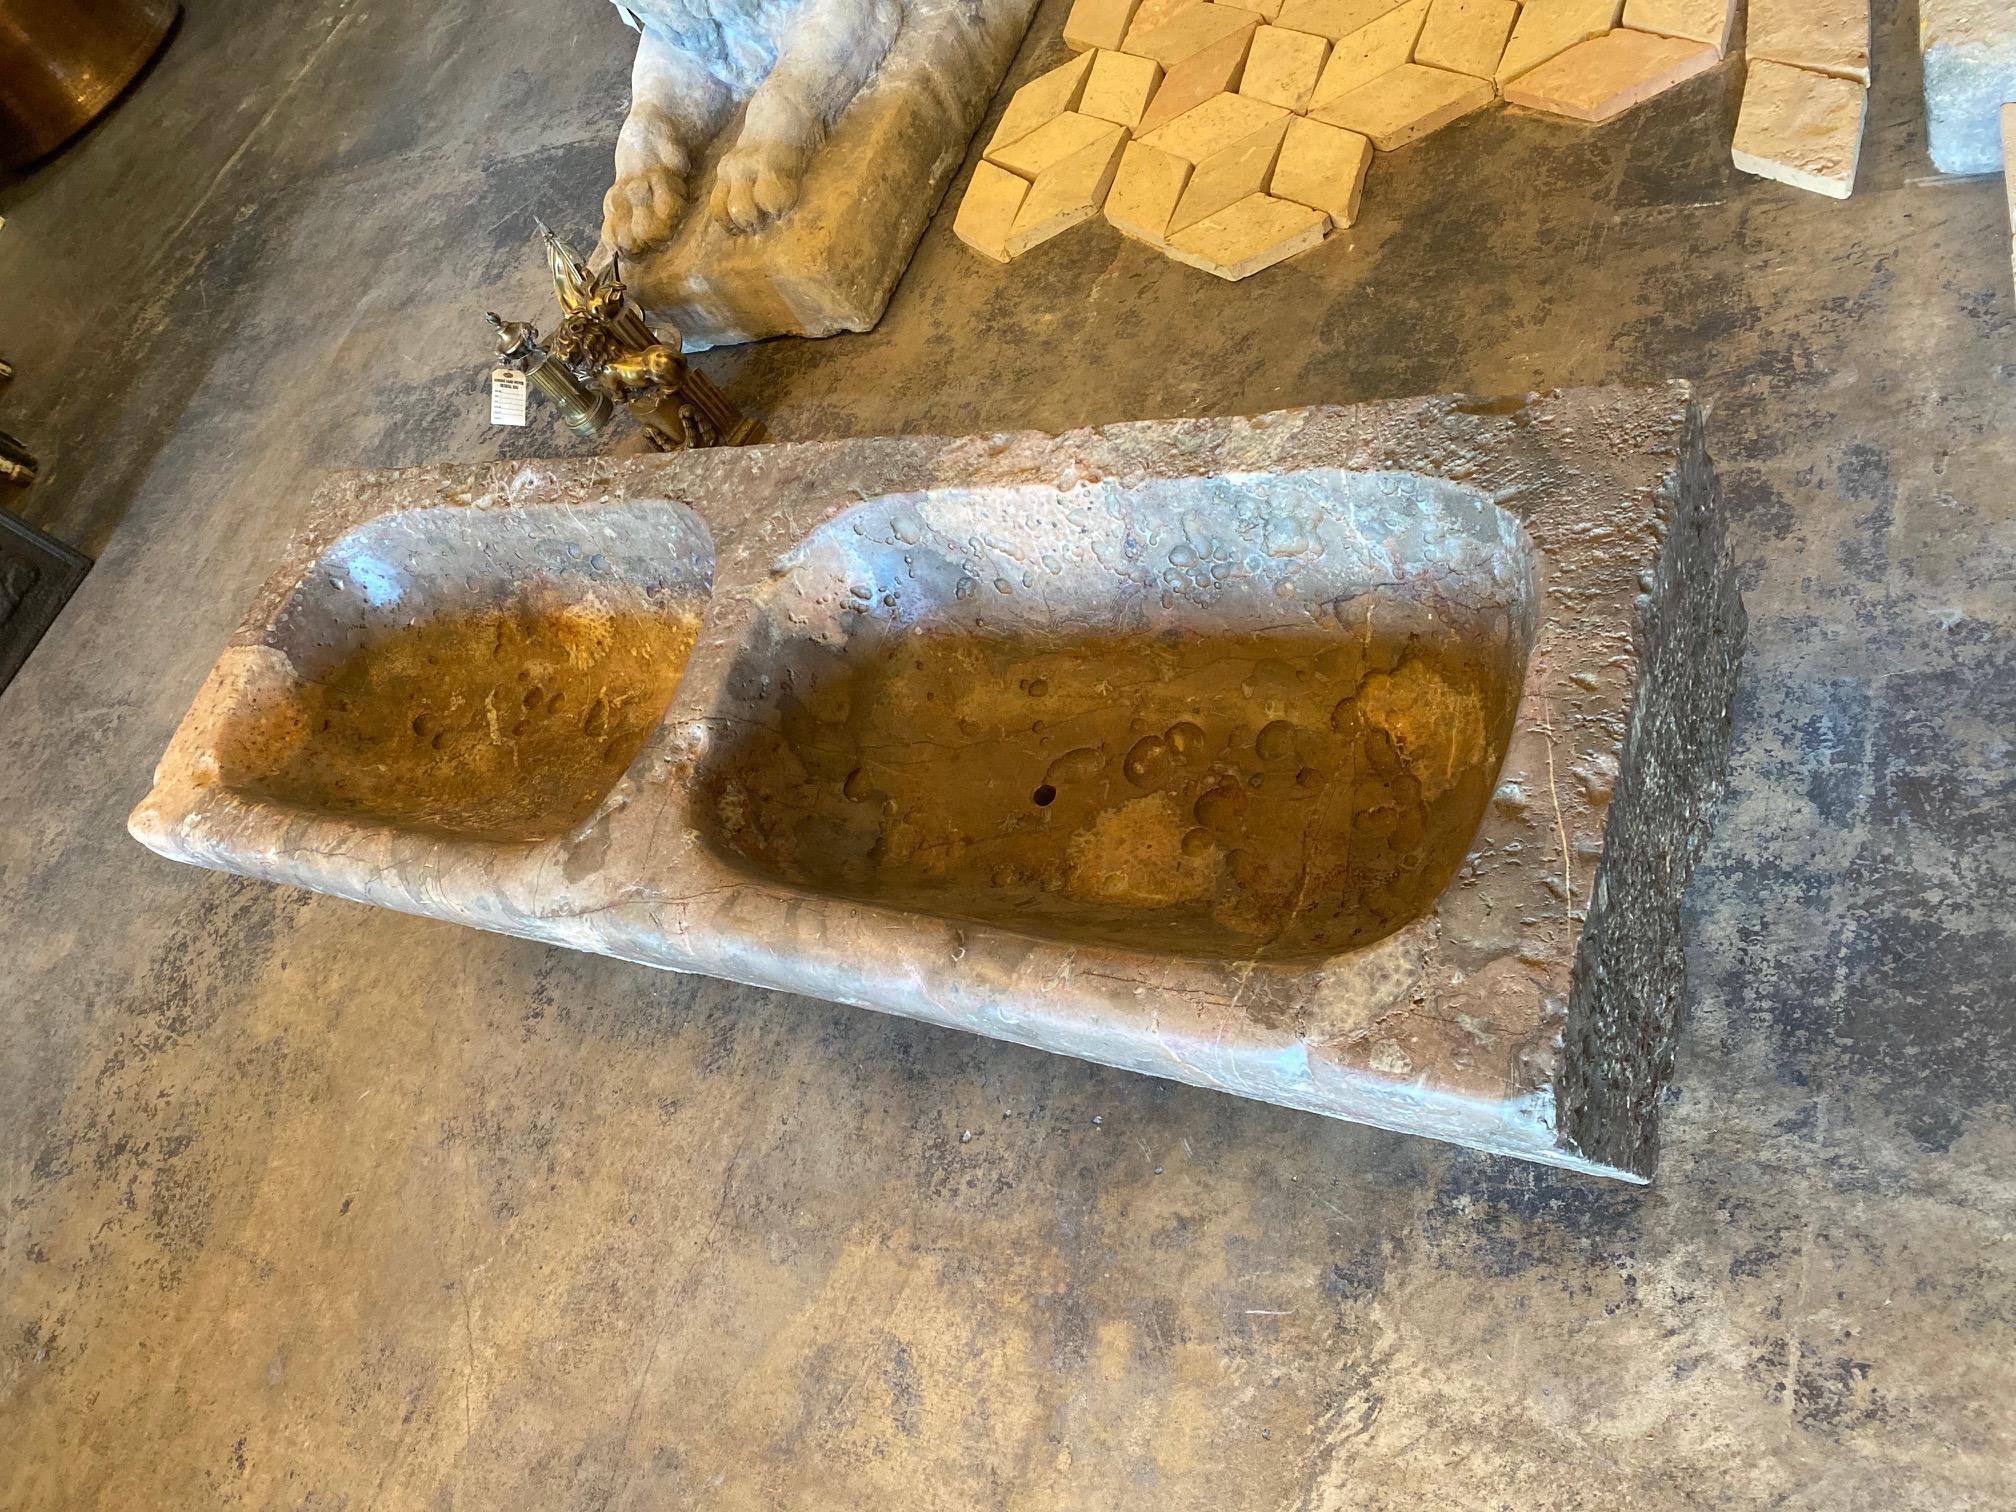 This unique stone trough features double basins and ring in the center to tie up your horse.

Measurements: 18” D x 56” L x 11” H.